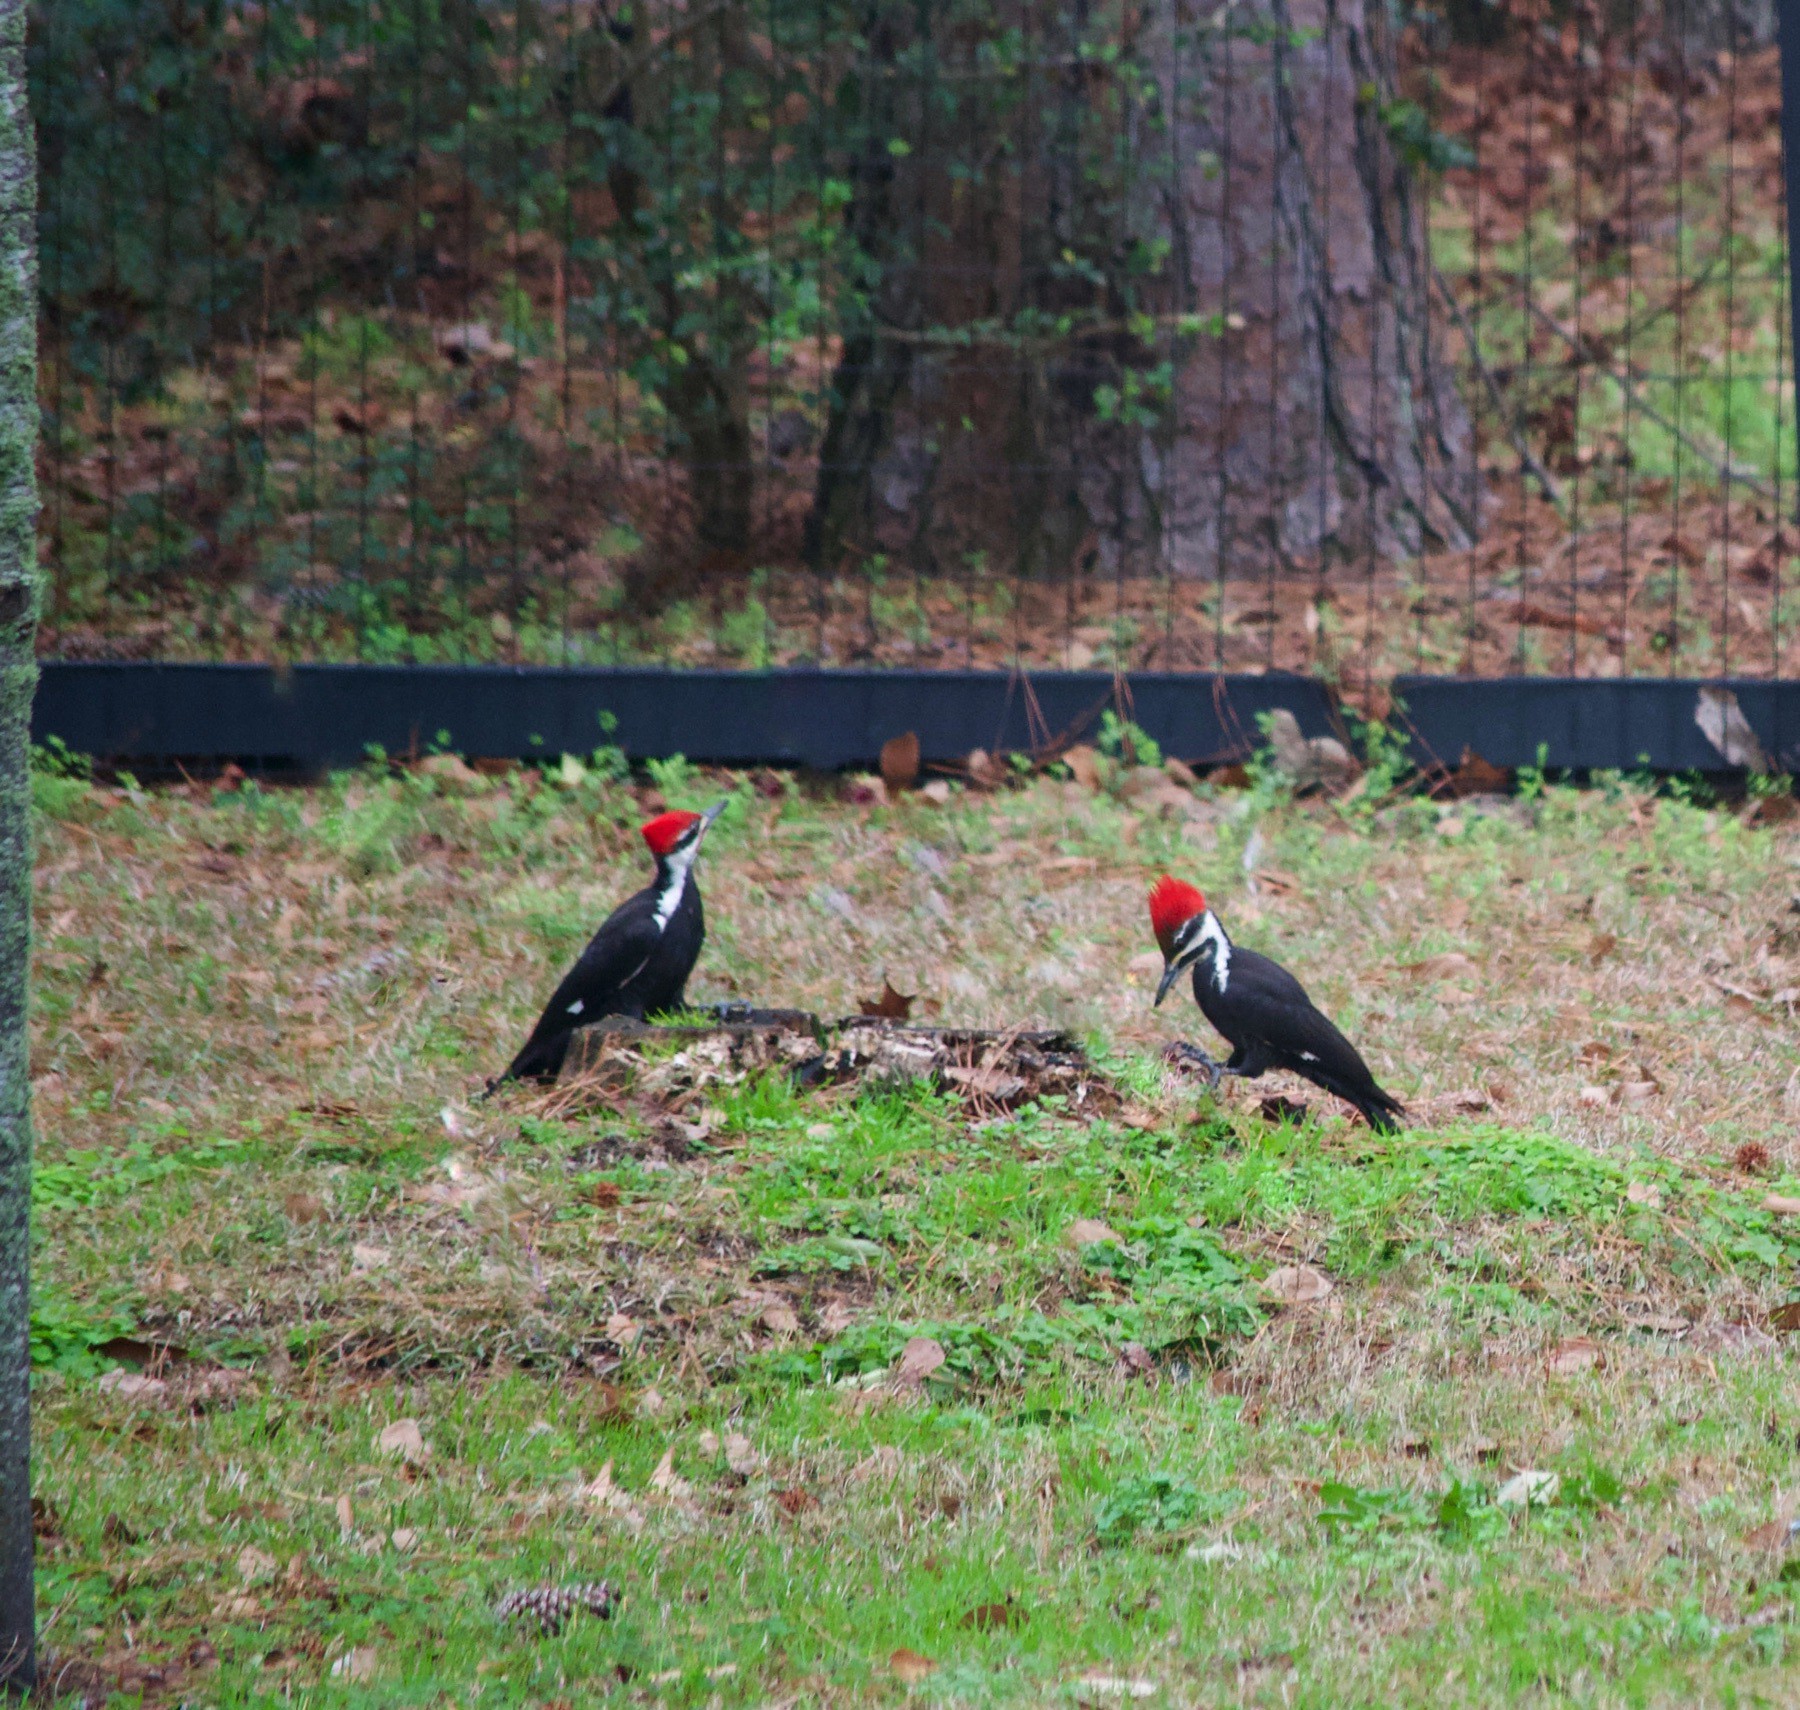 Two Pileated woodpeckers in the distance eating on a tree stump on the ground..